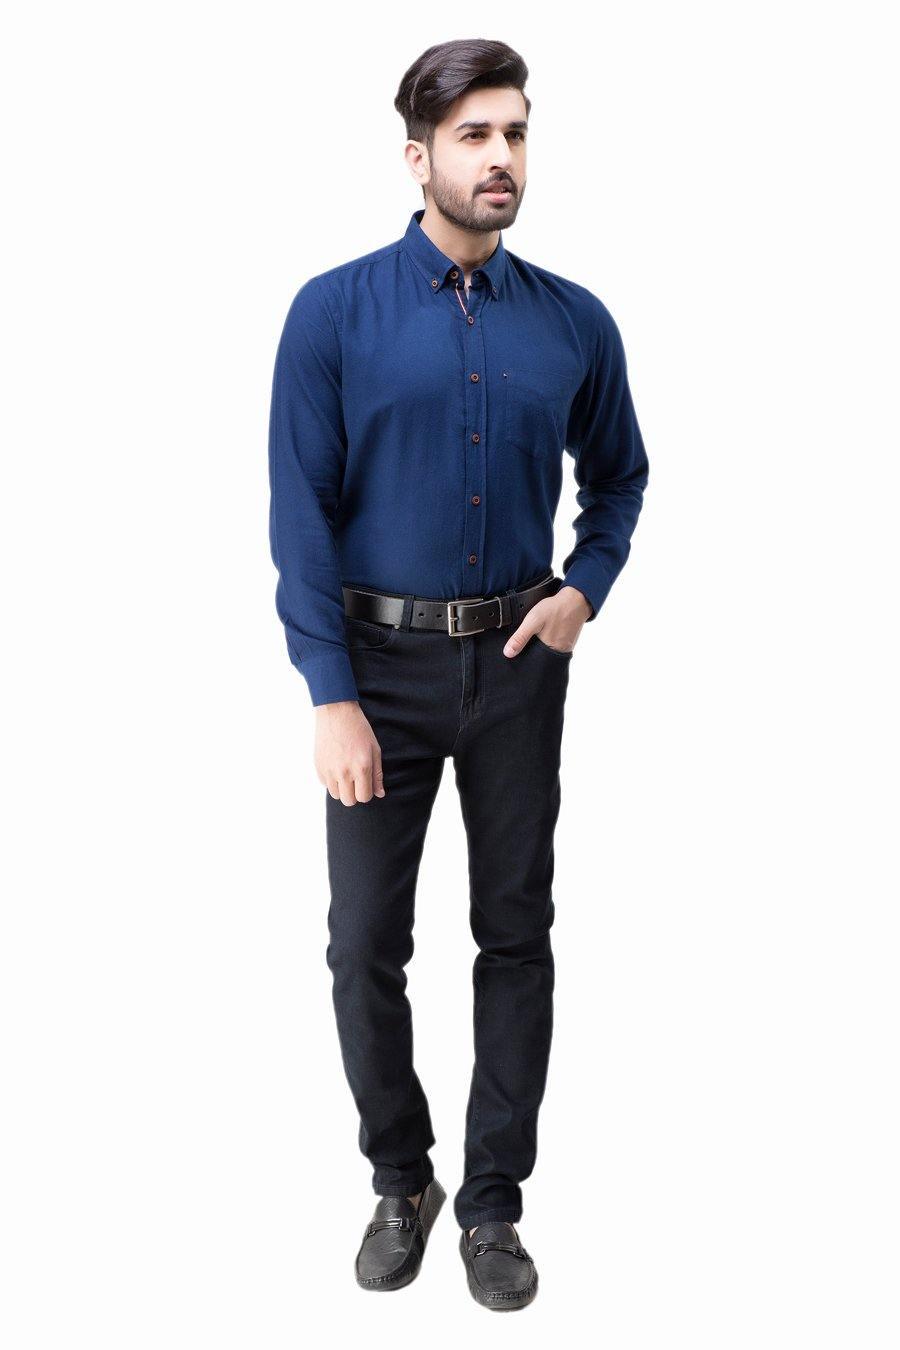 Smart shirt Button Down FUll sleeve Navy at Charcoal Clothing